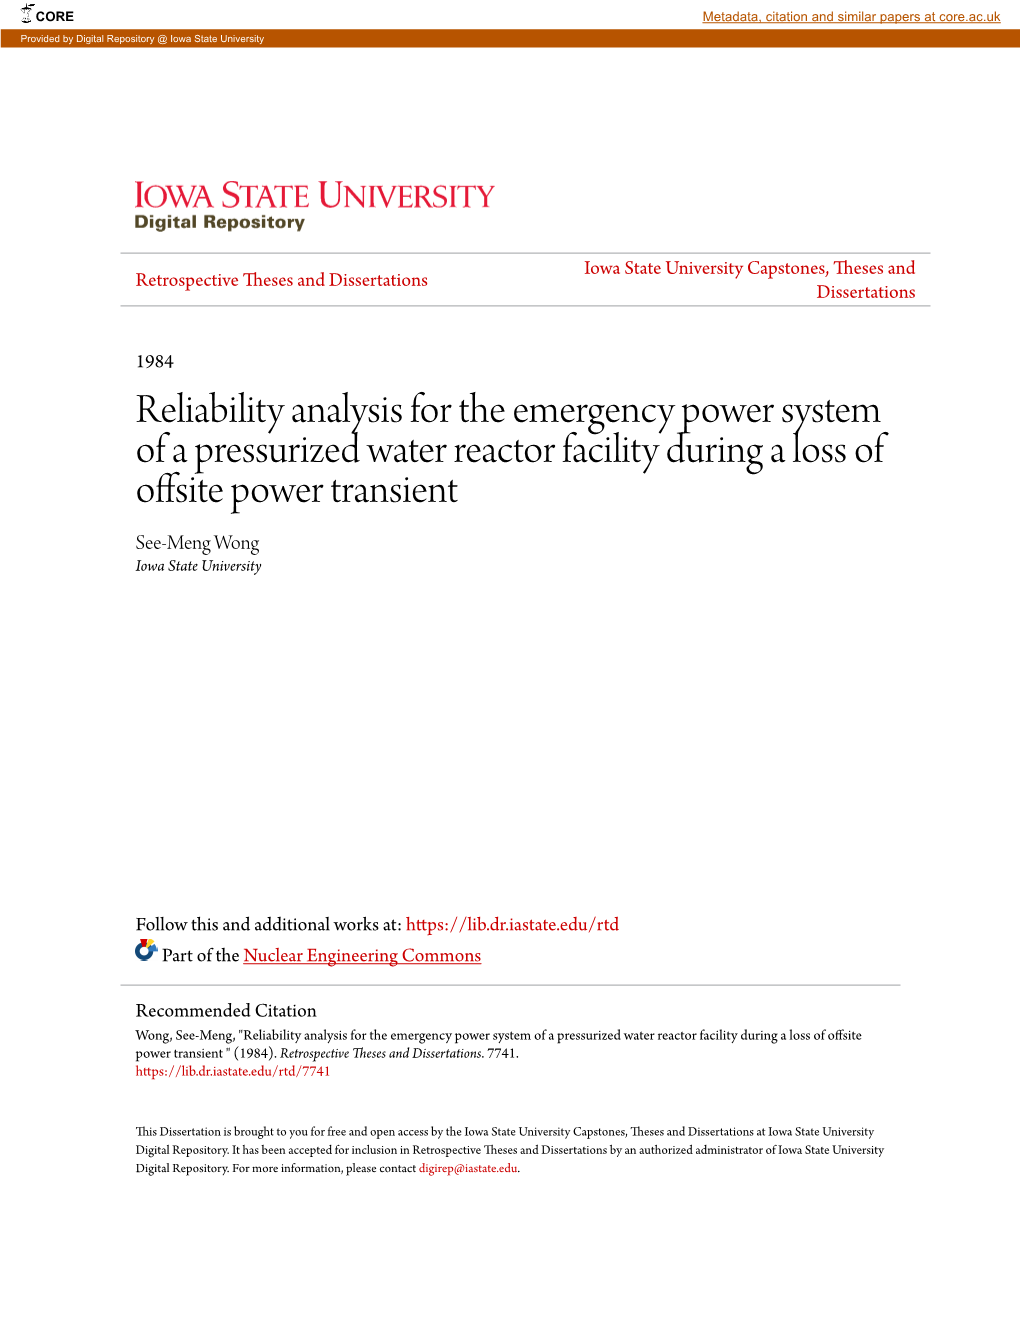 Reliability Analysis for the Emergency Power System of a Pressurized